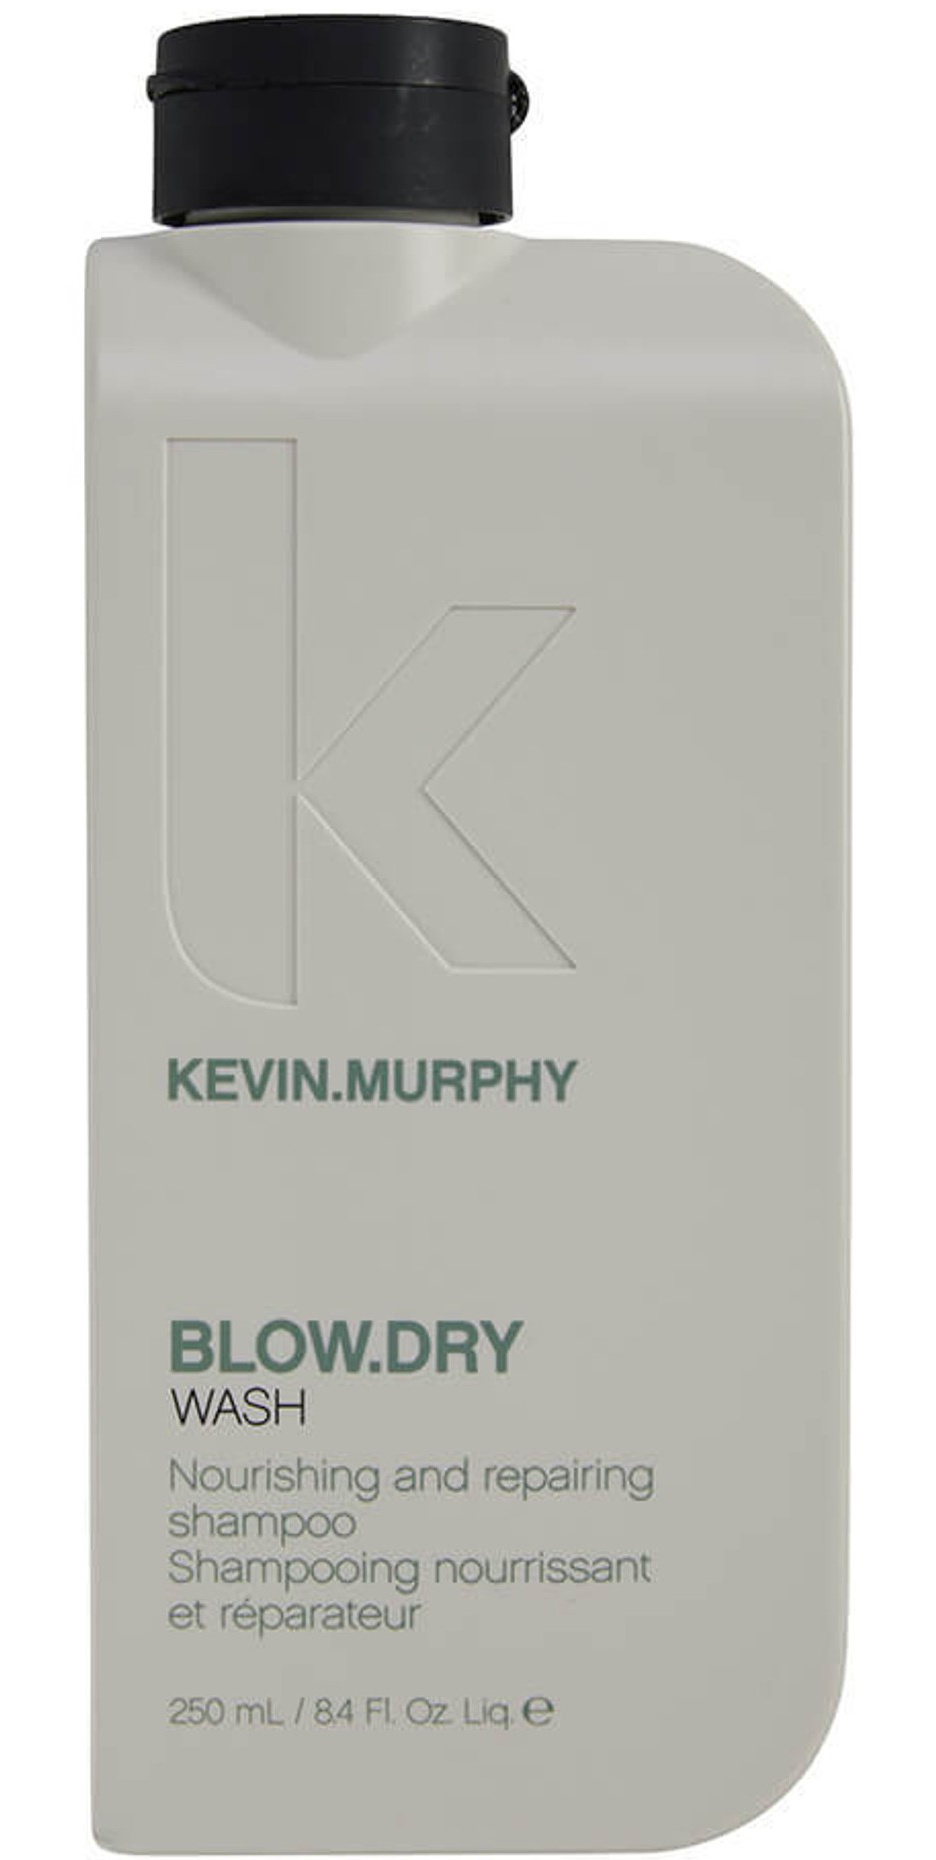 Kevin Murphy Blow.dry Wash